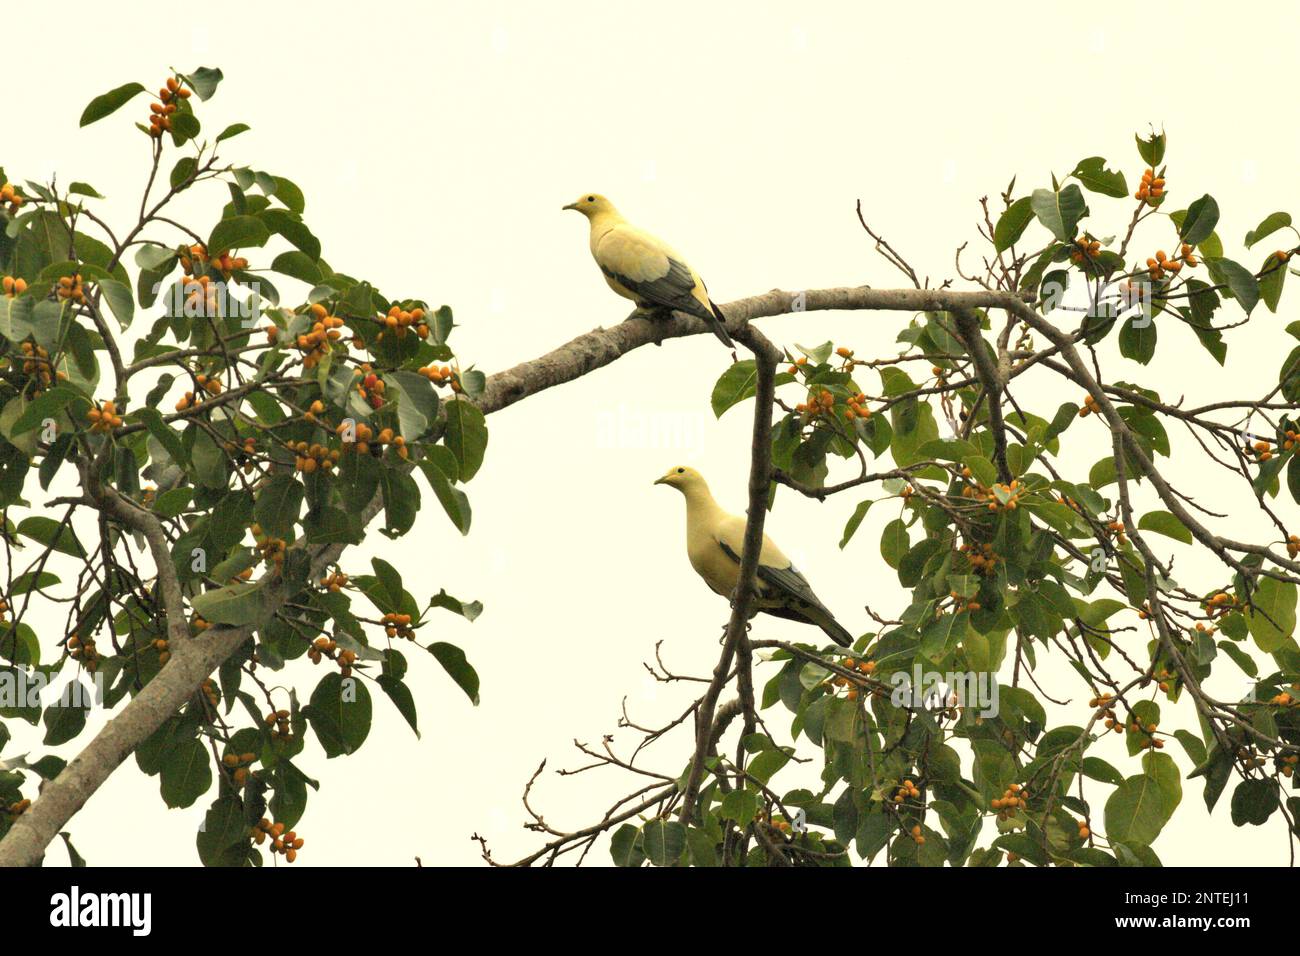 Two individuals of silver-tipped imperial pigeon (Ducula luctuosa), an endemic pigeon to Sulawesi, are perching near fig fruit in a forested area near Mount Tangkoko and Duasudara in Bitung, North Sulawesi, Indonesia. Stock Photo